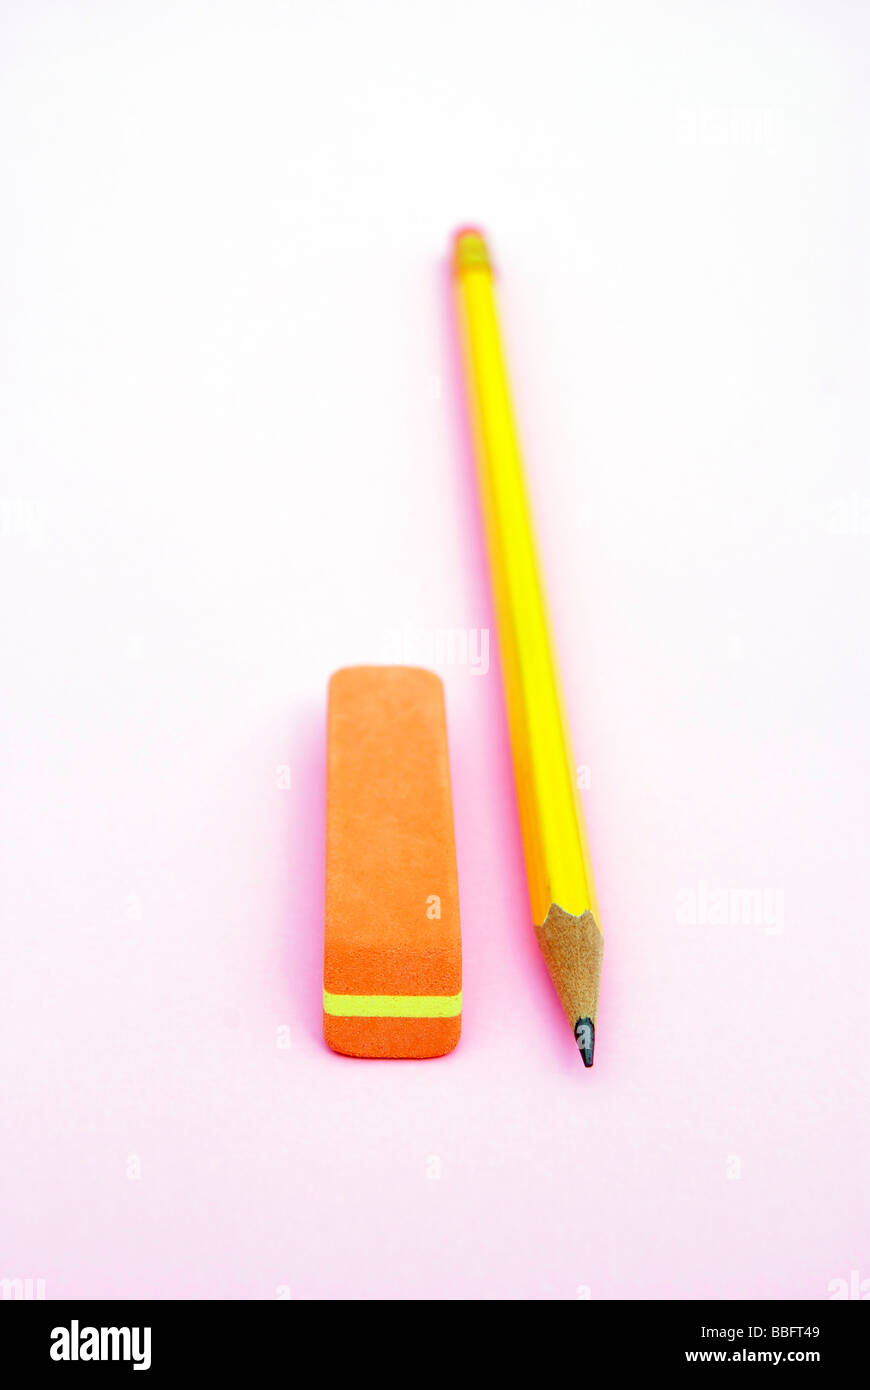 Yellow pencil with an eraser Stock Photo